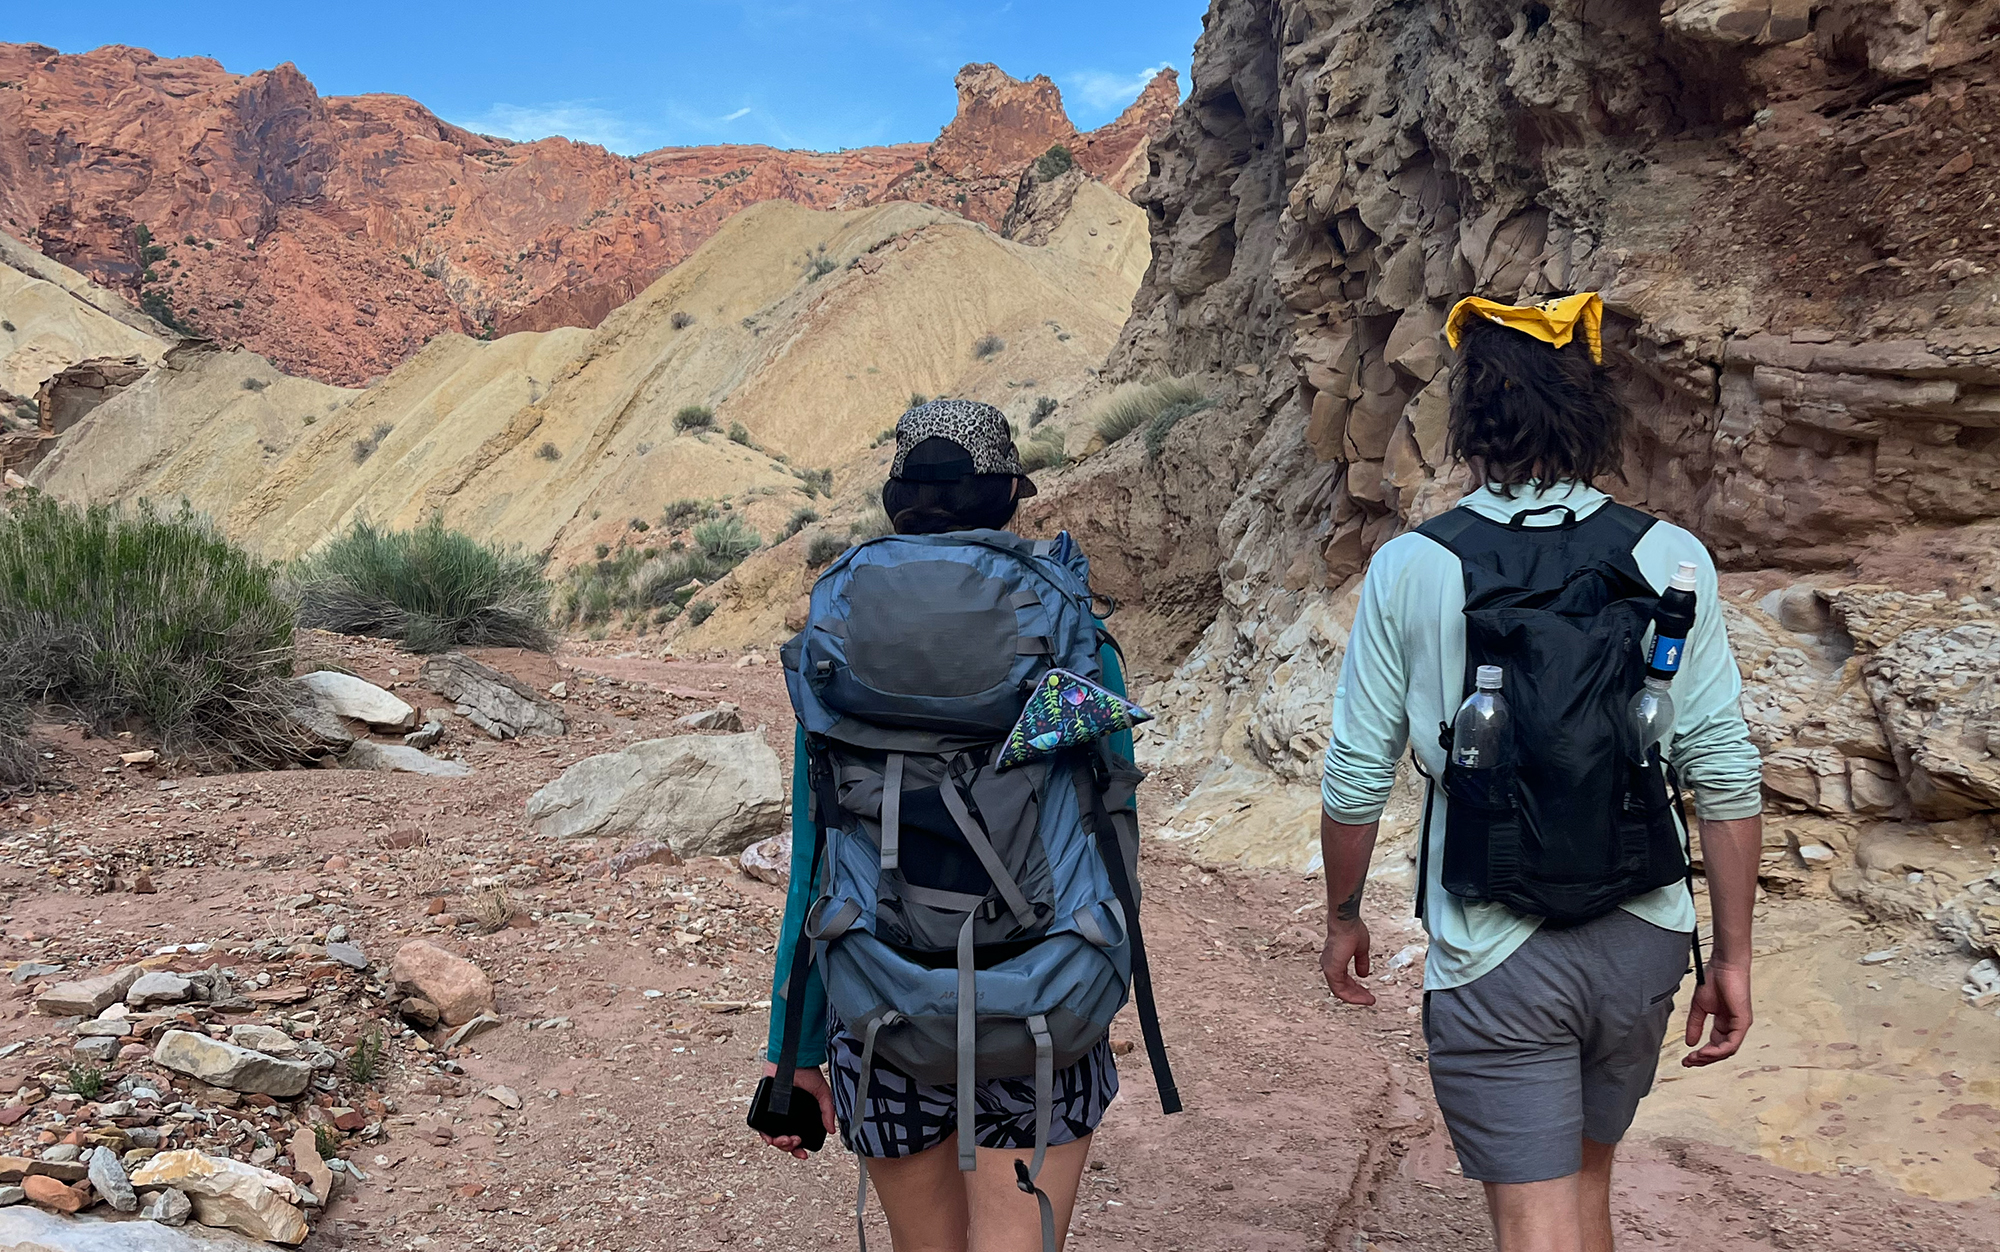 Two hikers walking in the desert with backpacks.